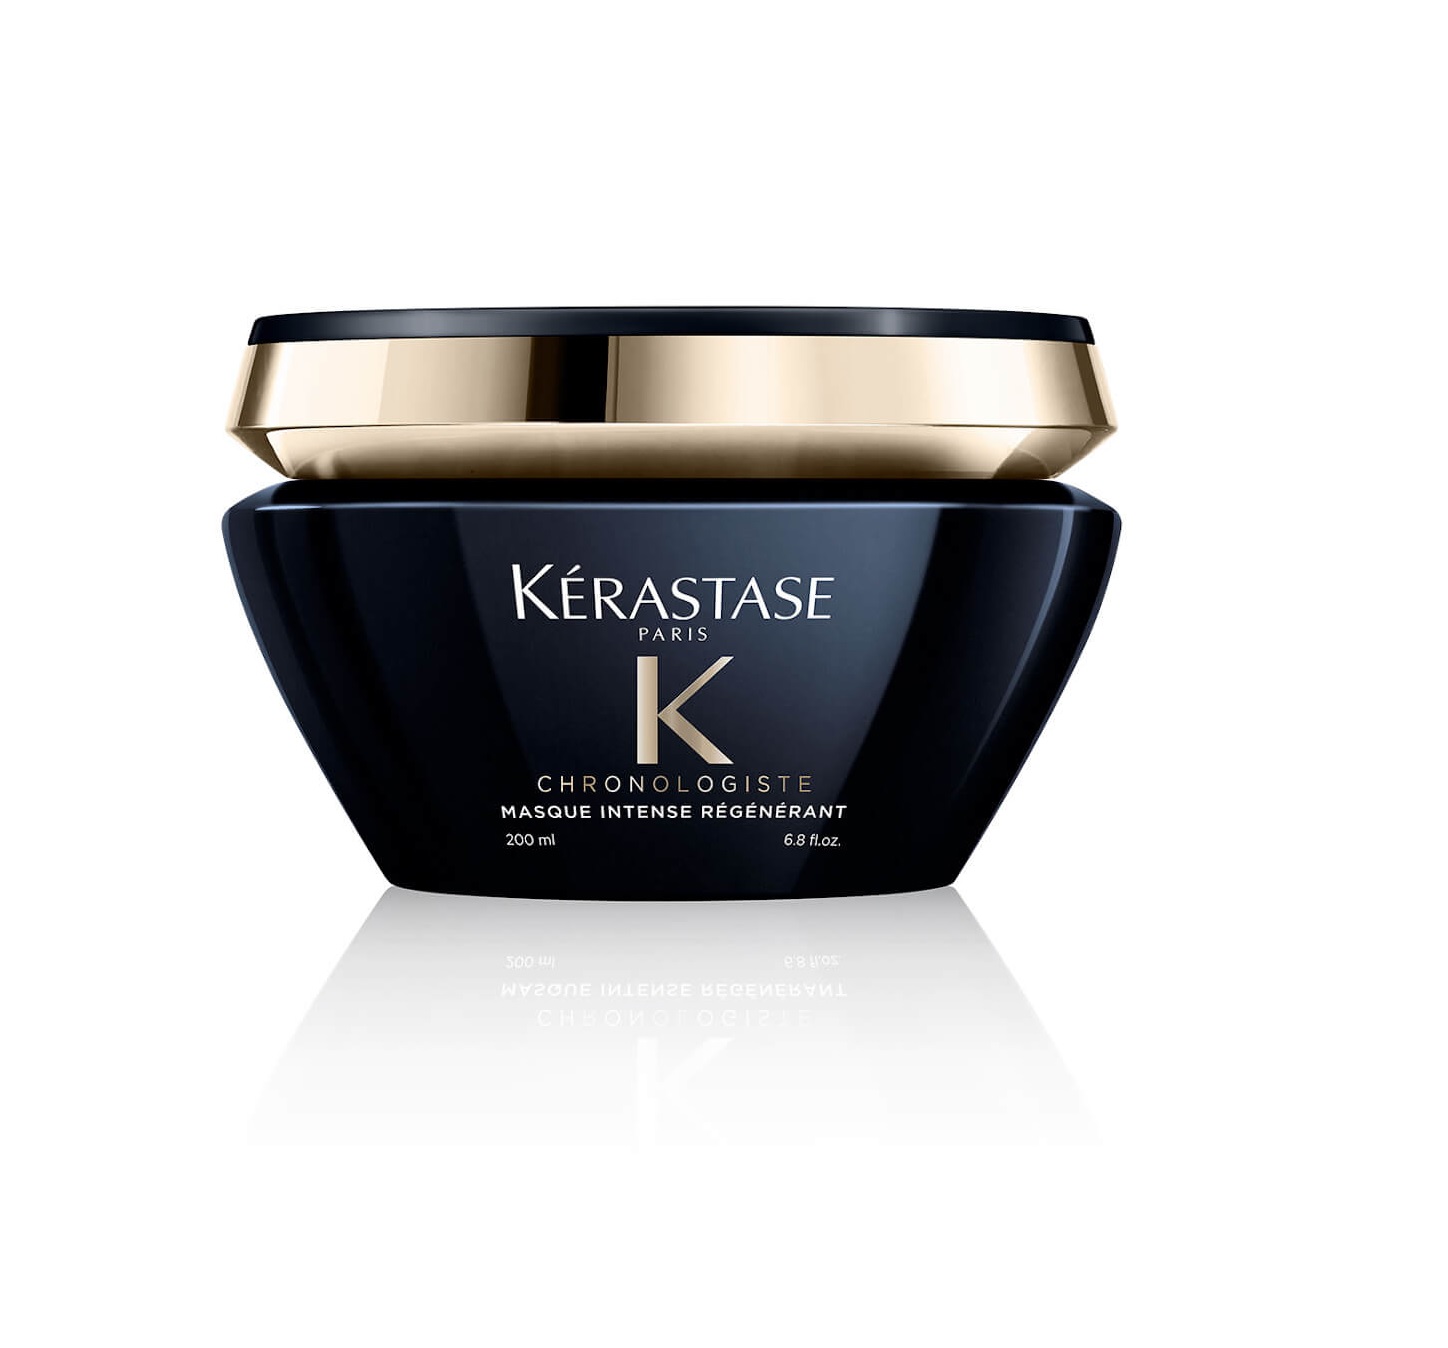 HQhair: Save Up to 33% on Selected Kerastase with Complimentary Gift